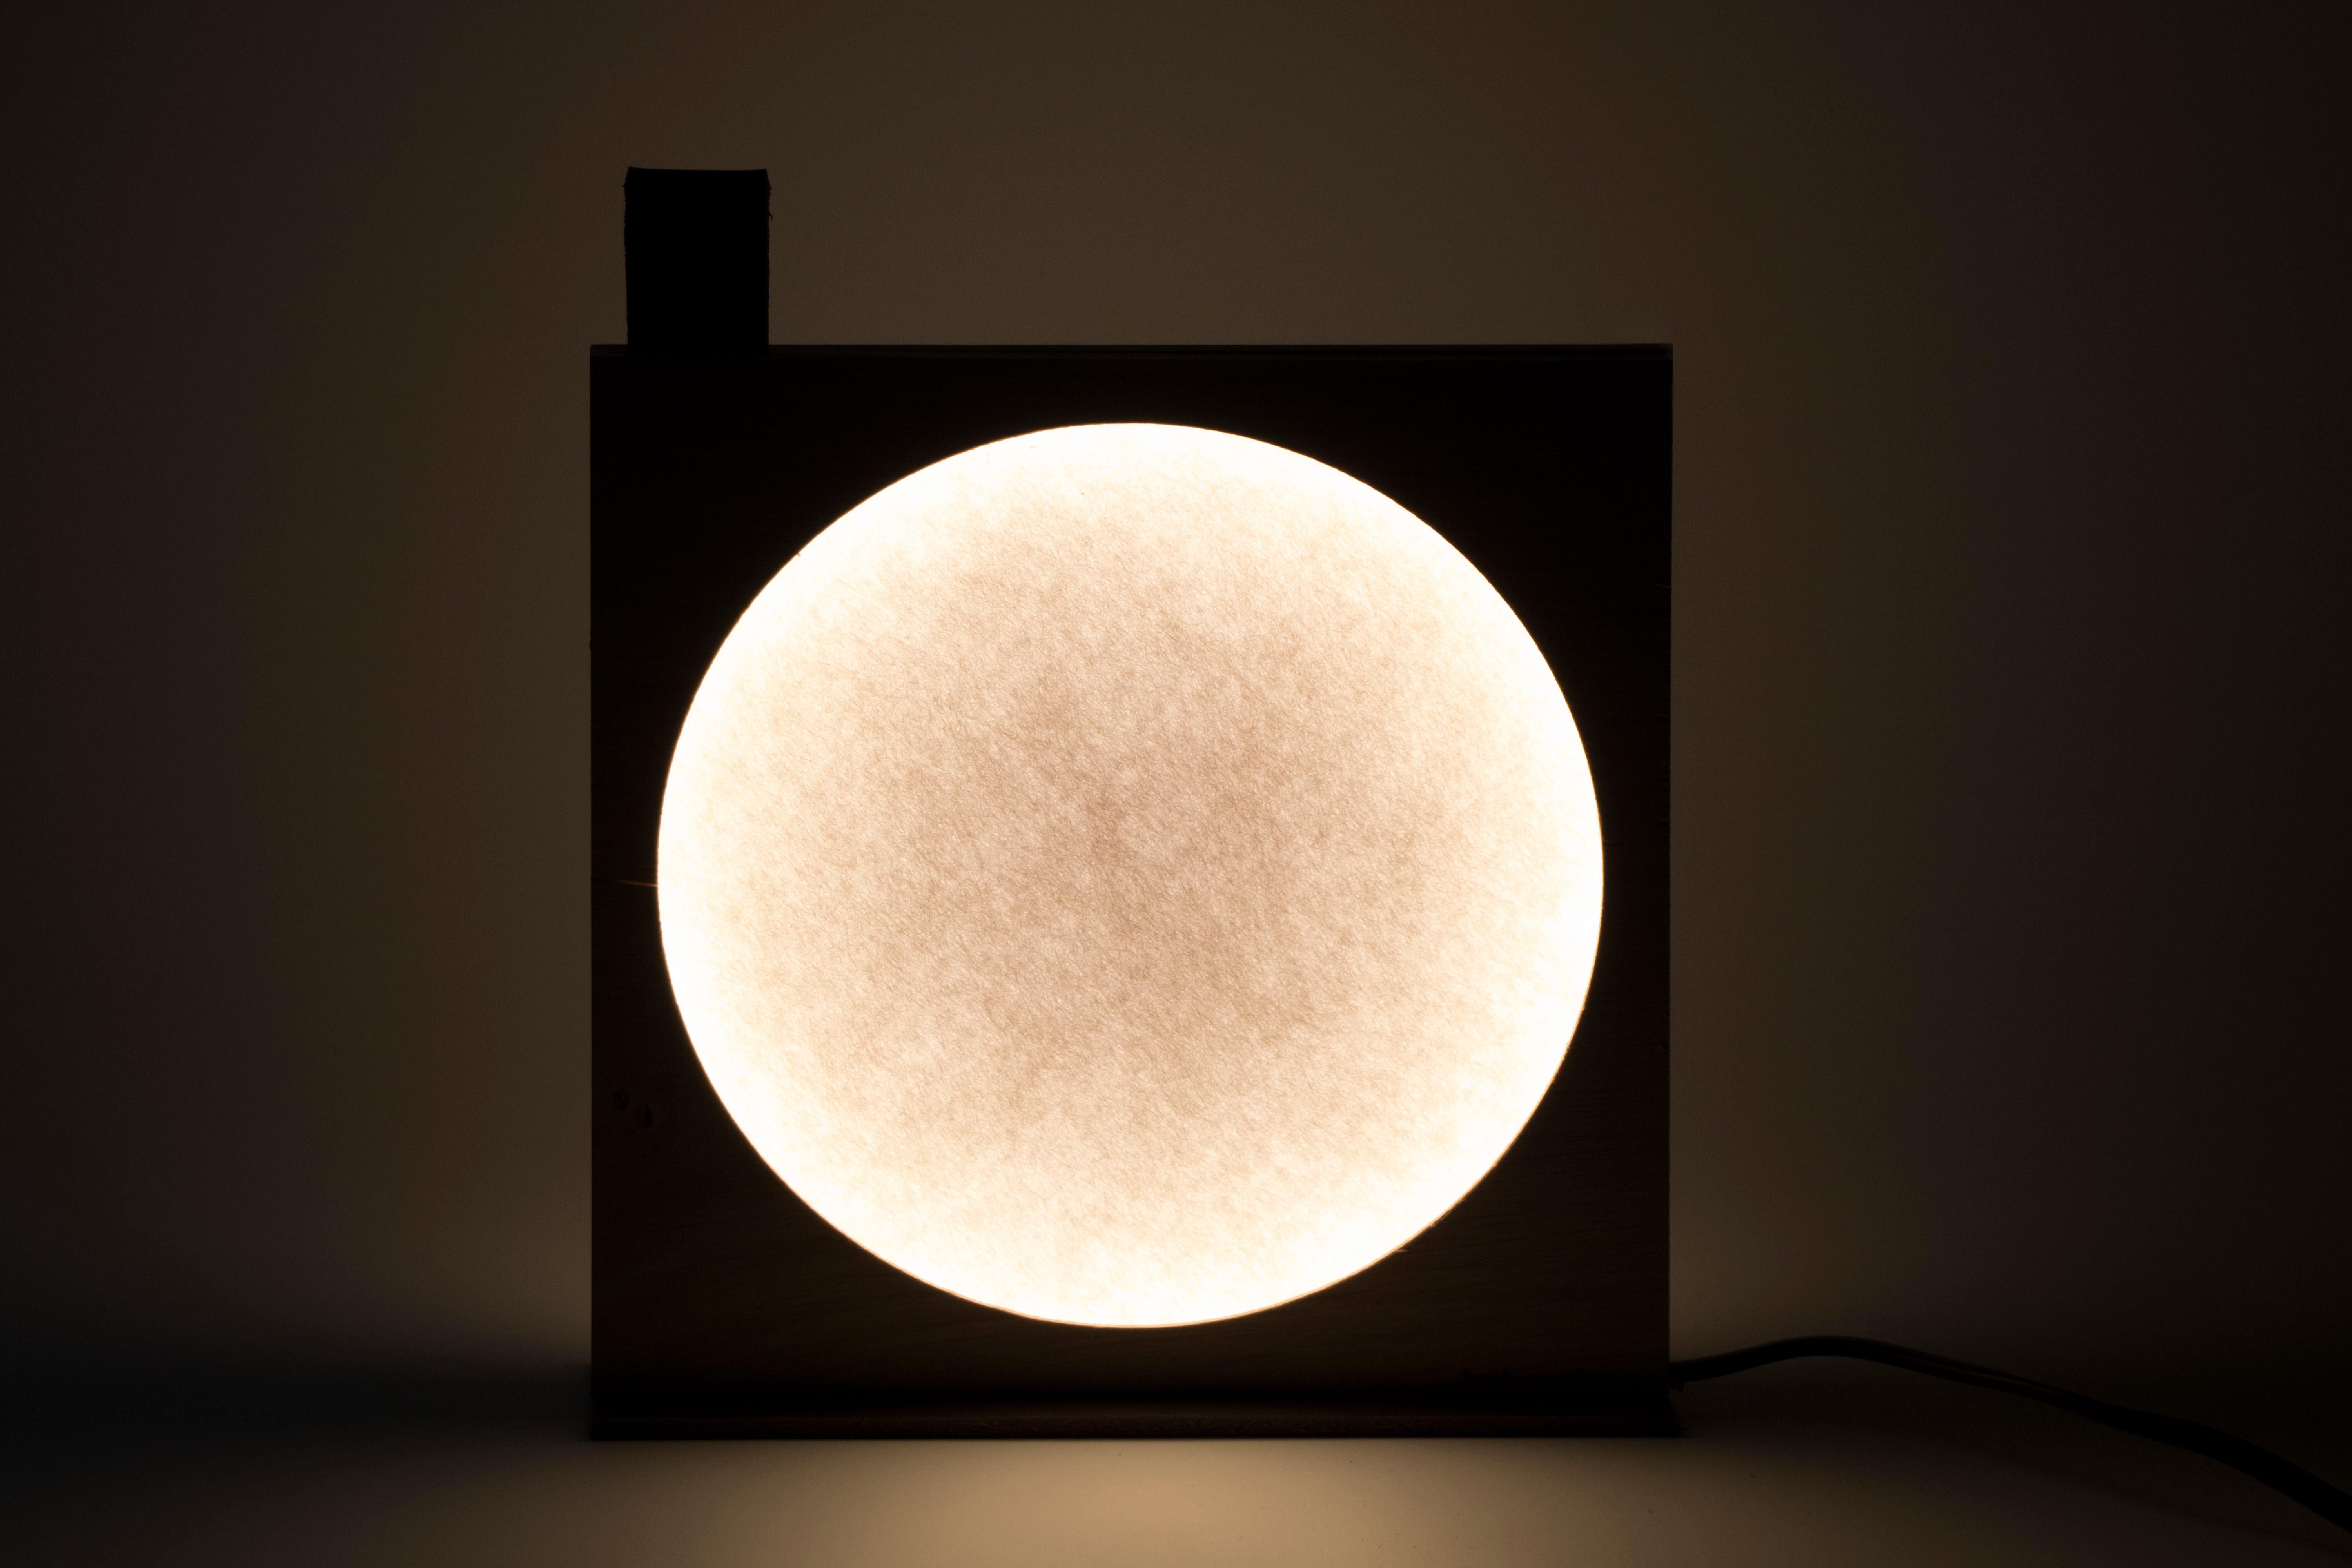 Moon Table Lamp by KNGB
Dimensions: W 20 x H 20 cm
Material: Wood, LED LED 2700°k 7w integrated.

KNGB, design studio has been based in Roubaix since 2014, within the former heart of the textile industry. We specify our style and artisanal know-how